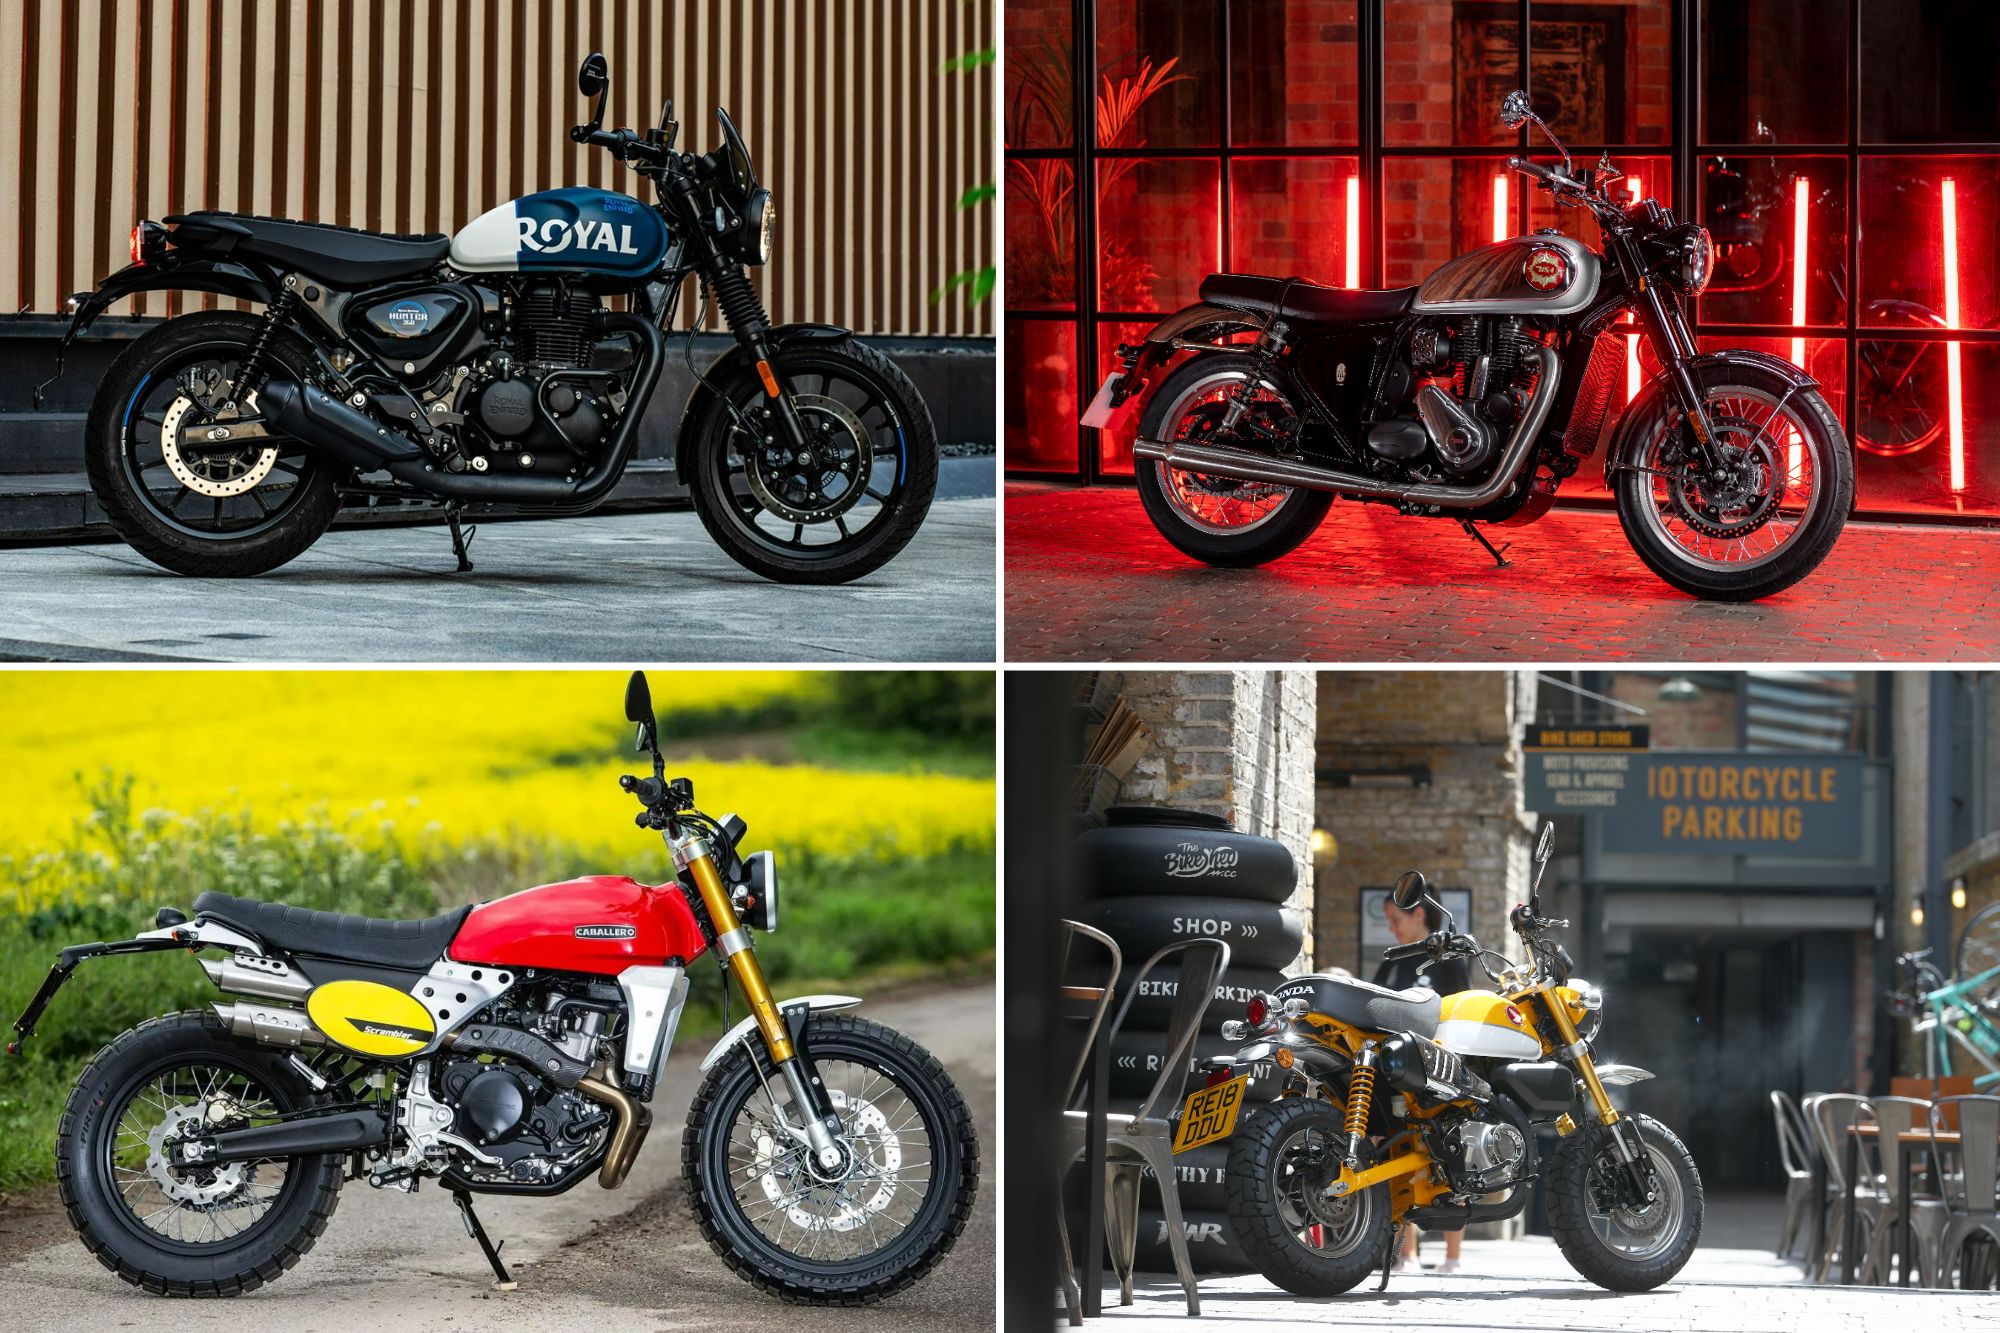 Motorcycle experts have picked the best retro bikes you can buy new for under £8,000